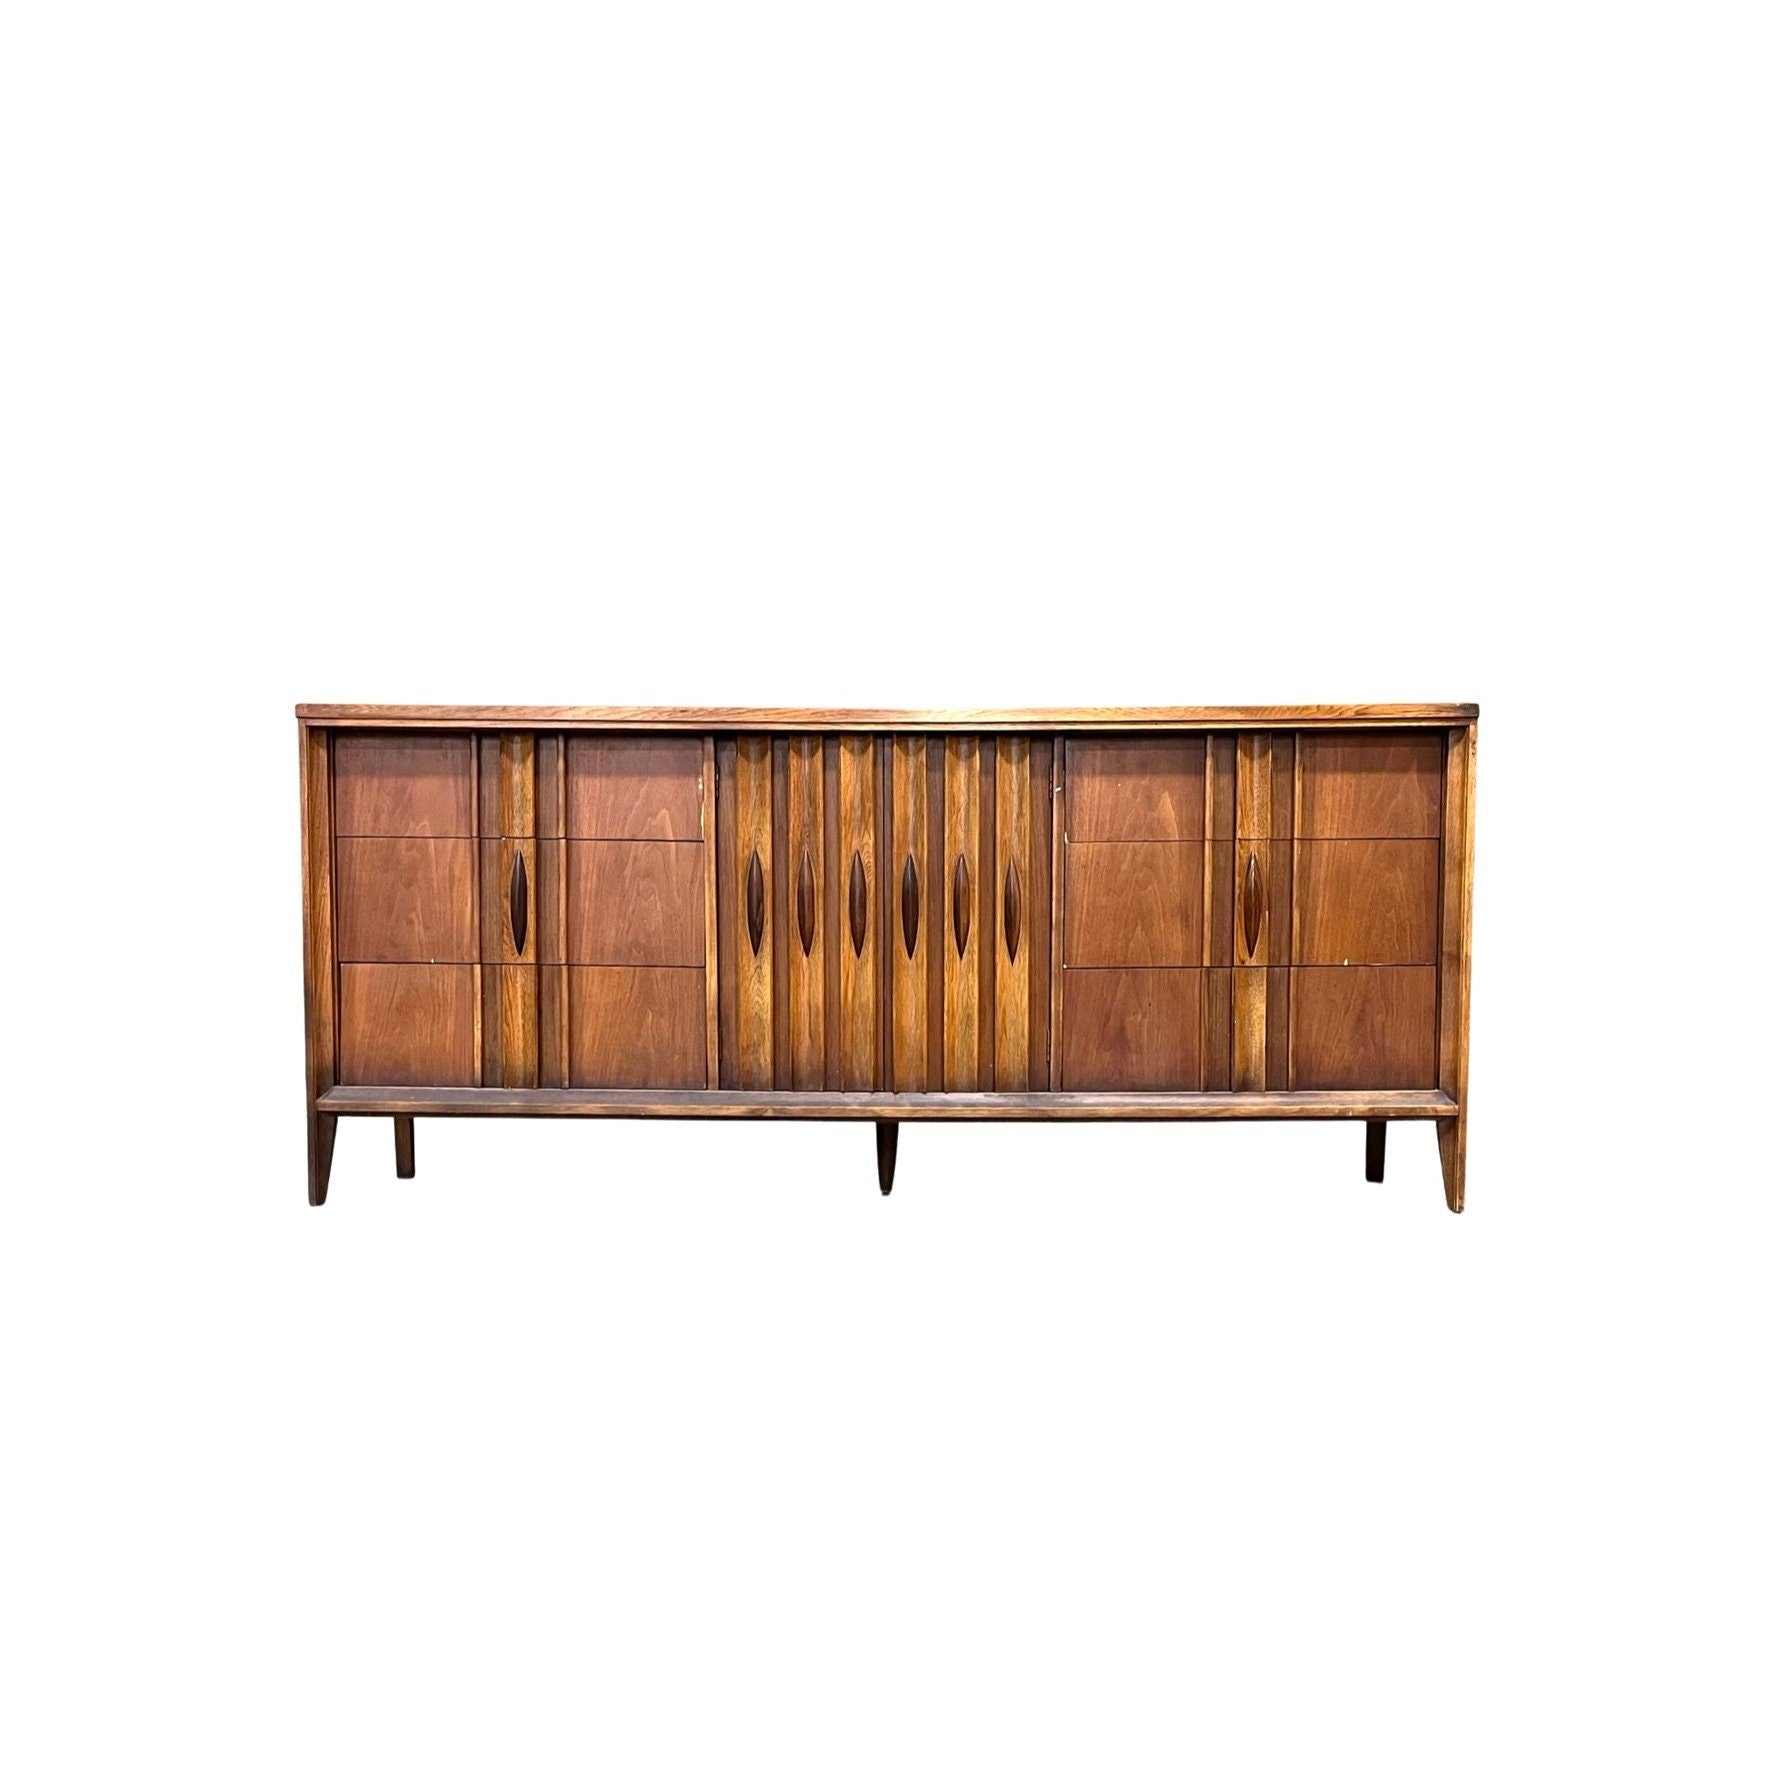 Vintage Thomasville dresser from the 1960s with ribbed facade and walnut sculpted ellipses